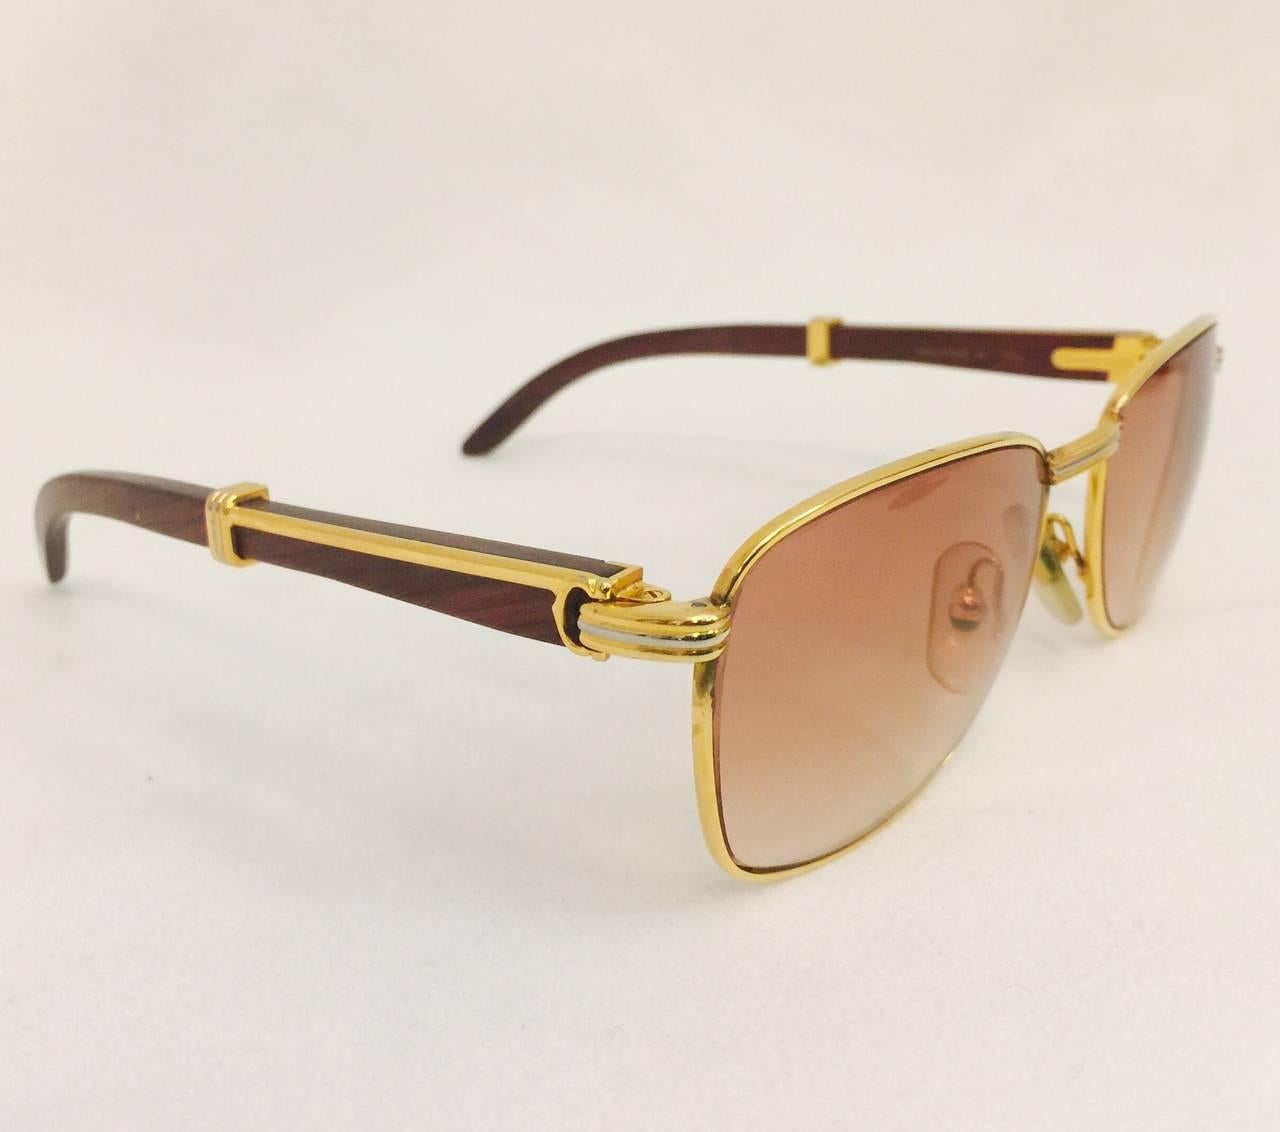  Coveted and Current Cartier Vintage Monceau Sunglasses 18K Gold & Wood In Excellent Condition For Sale In Palm Beach, FL